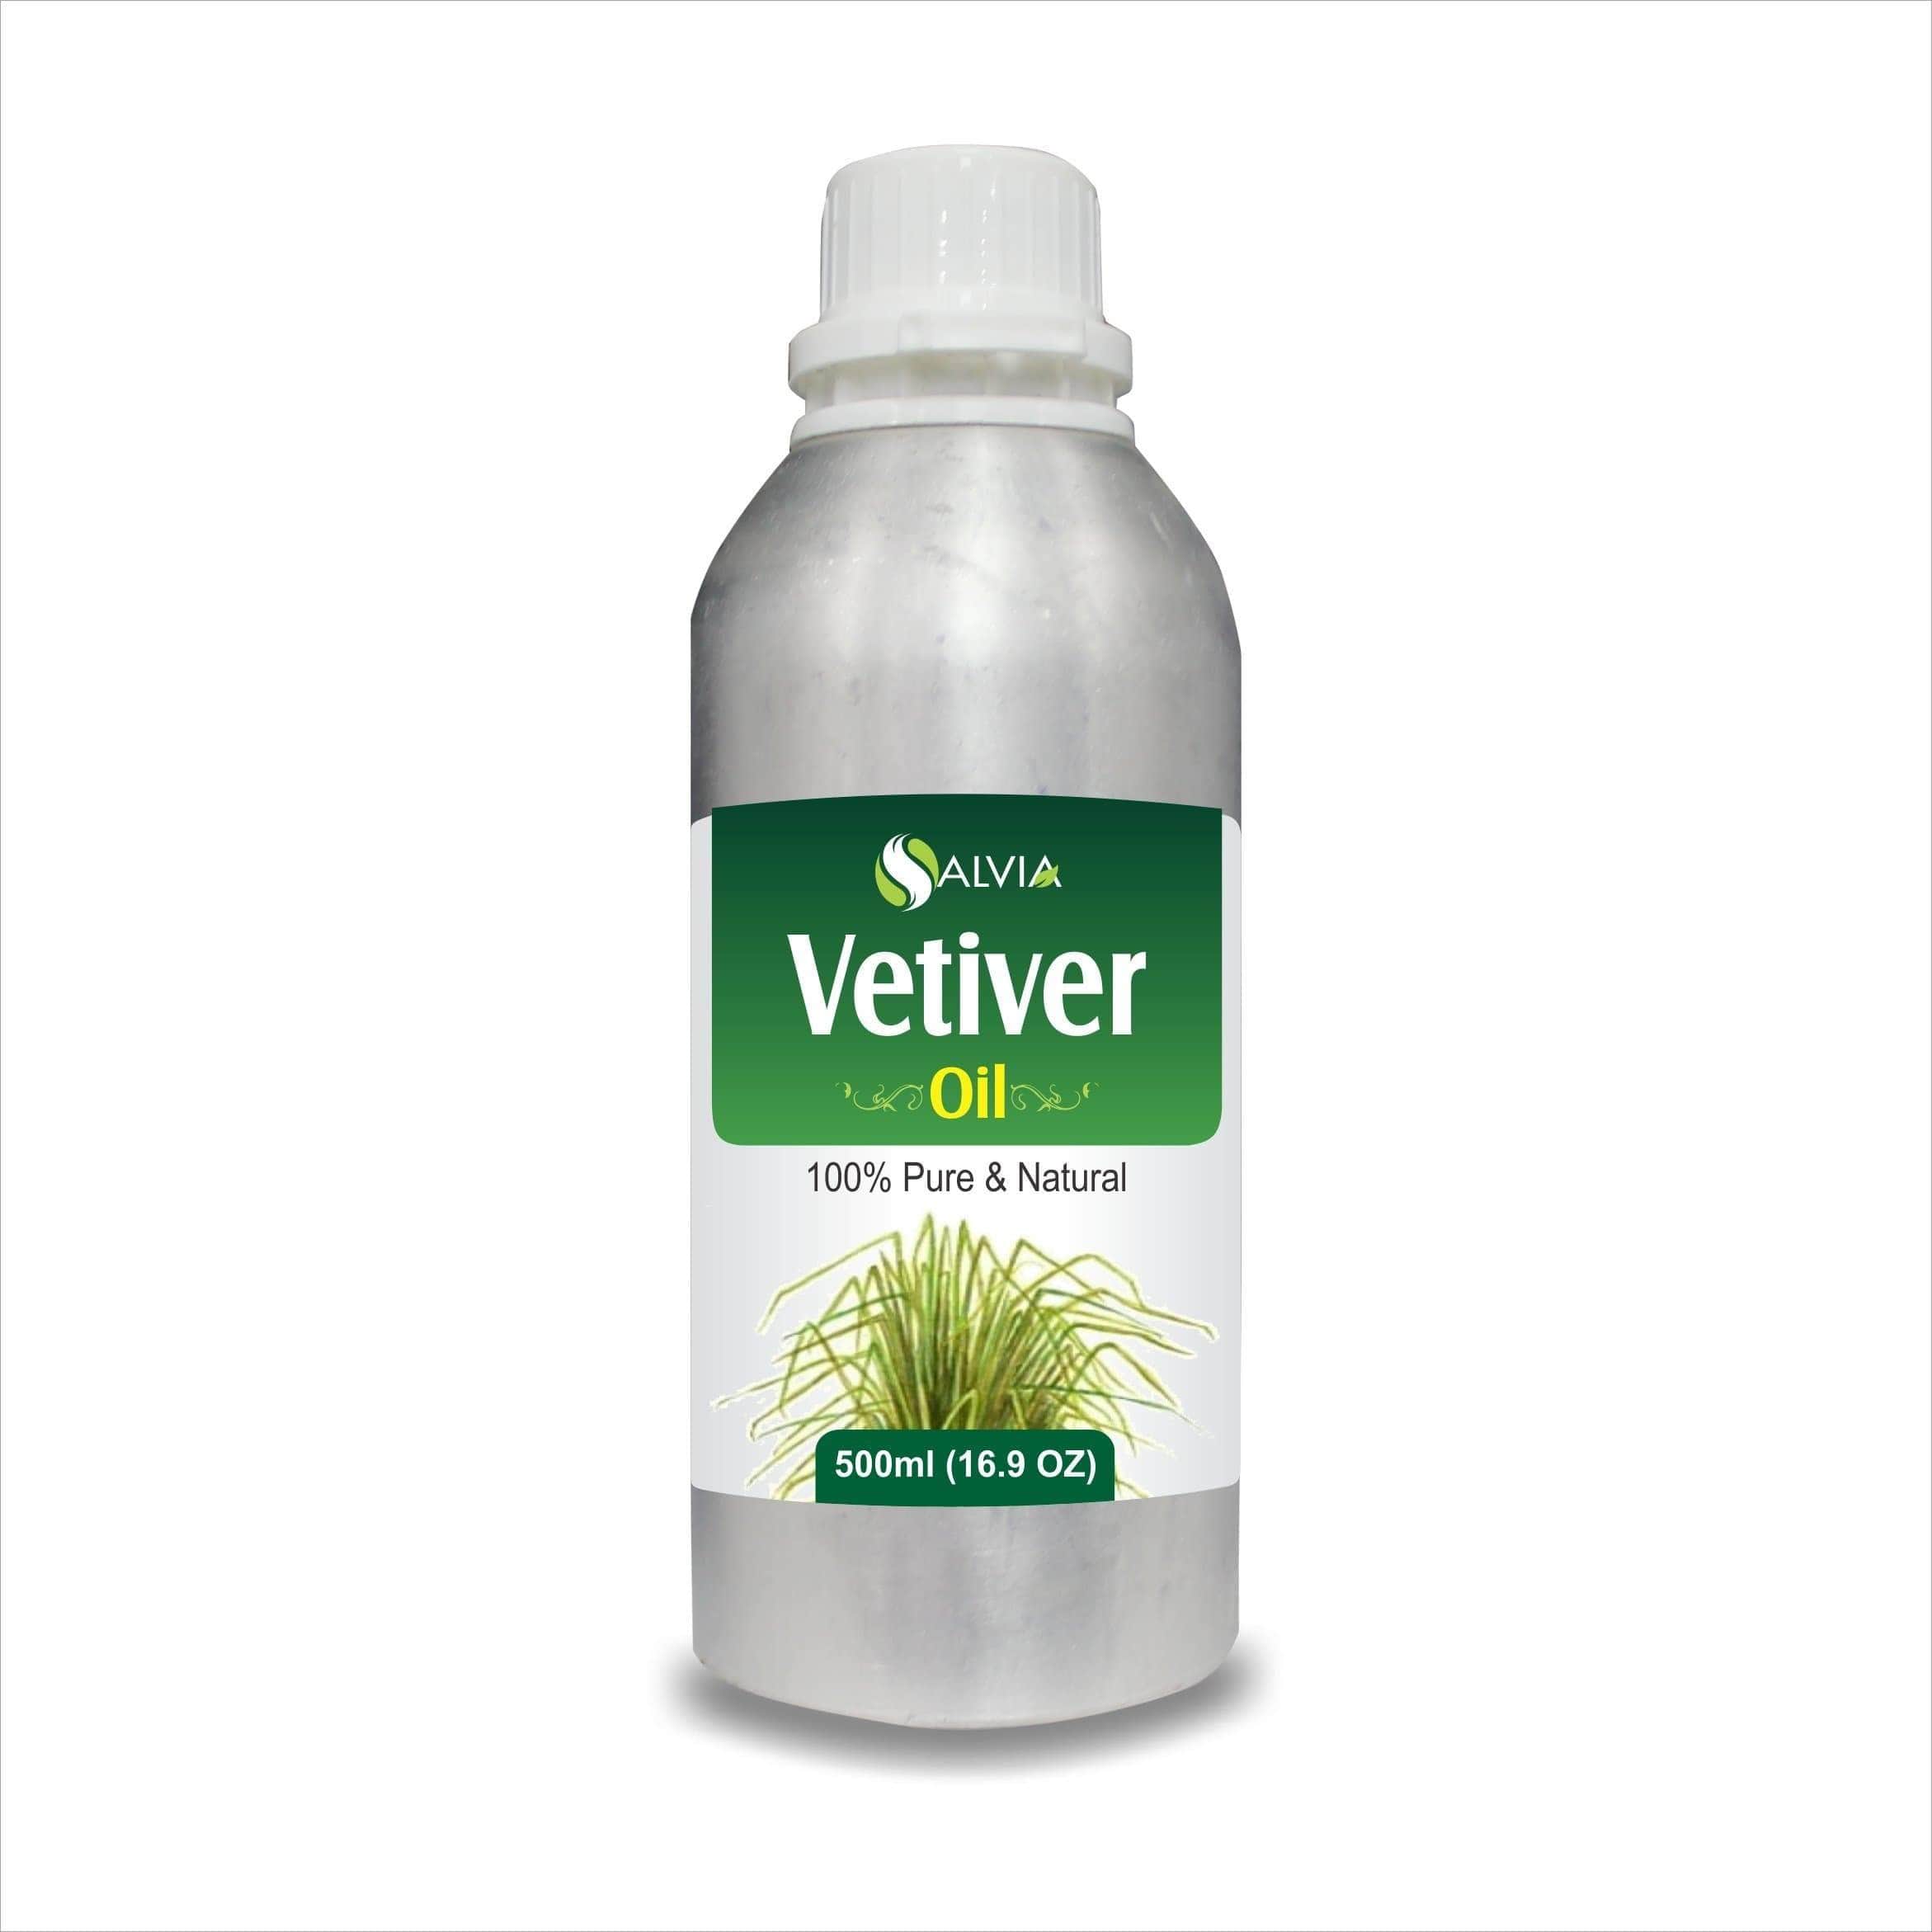  Vetiver benefits for male